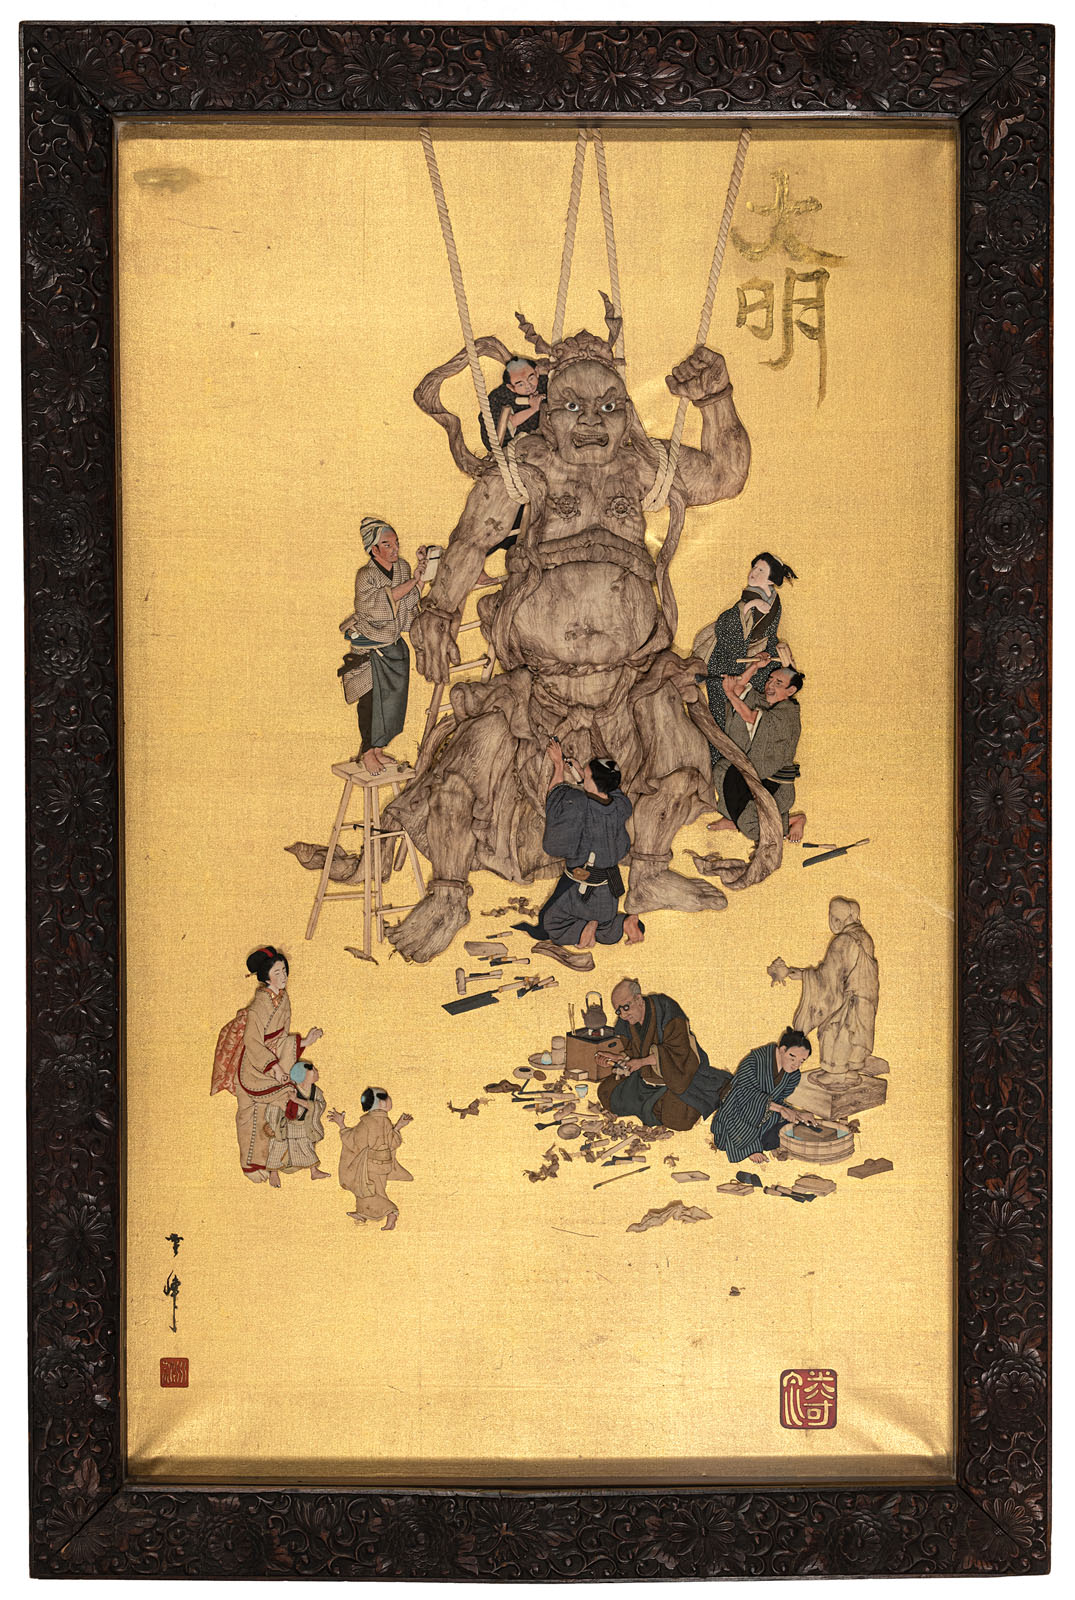 A VERY FINE OSHIE DEPICTING THE CARVING OF A NIÔ STATUE WITH ARTISANS AND SPECTATORS - Image 10 of 10